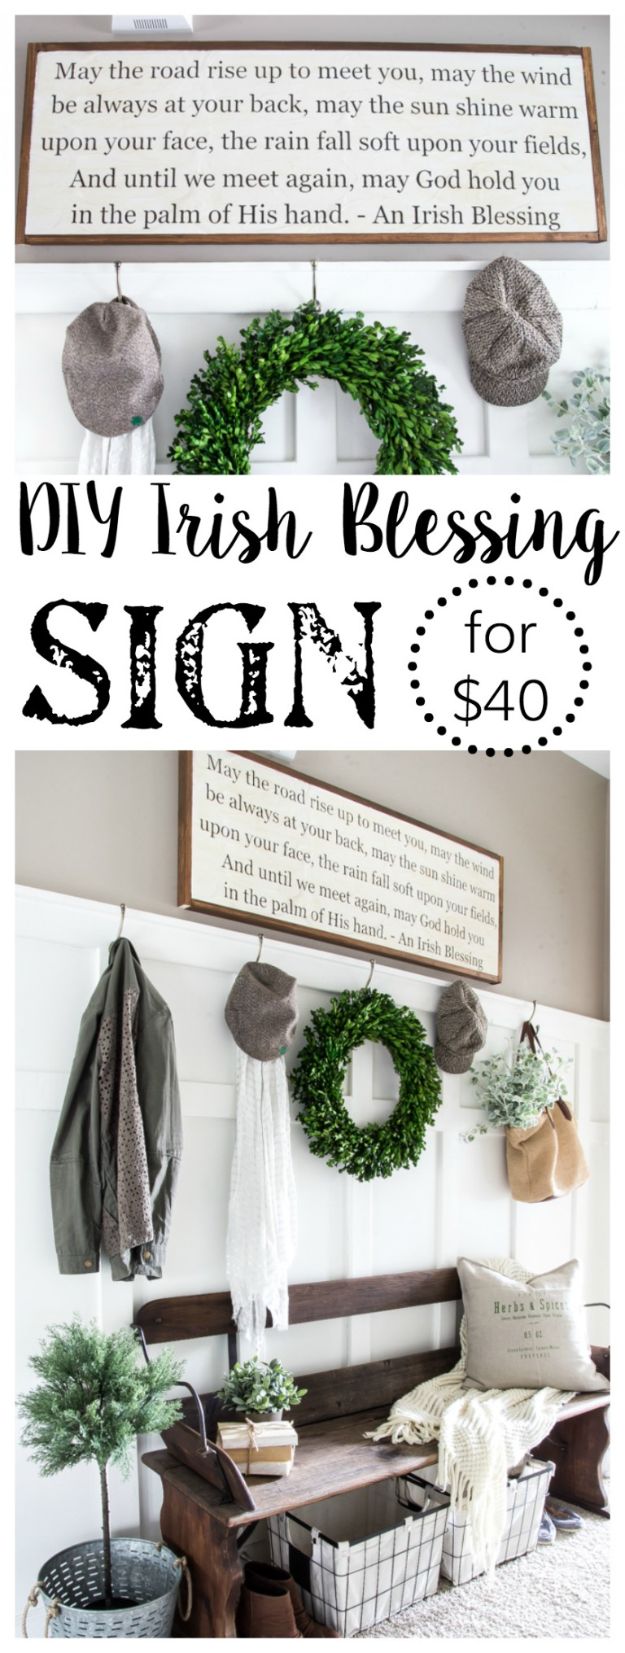 DIY Signs To Make For Your Home | DIY Irish Blessing Sign - Rustic Wall Art Ideas and Homemade Sign for Bedroom, Kitchen, Farmhouse Decor | Stencil Pallet and Distressed Vintage